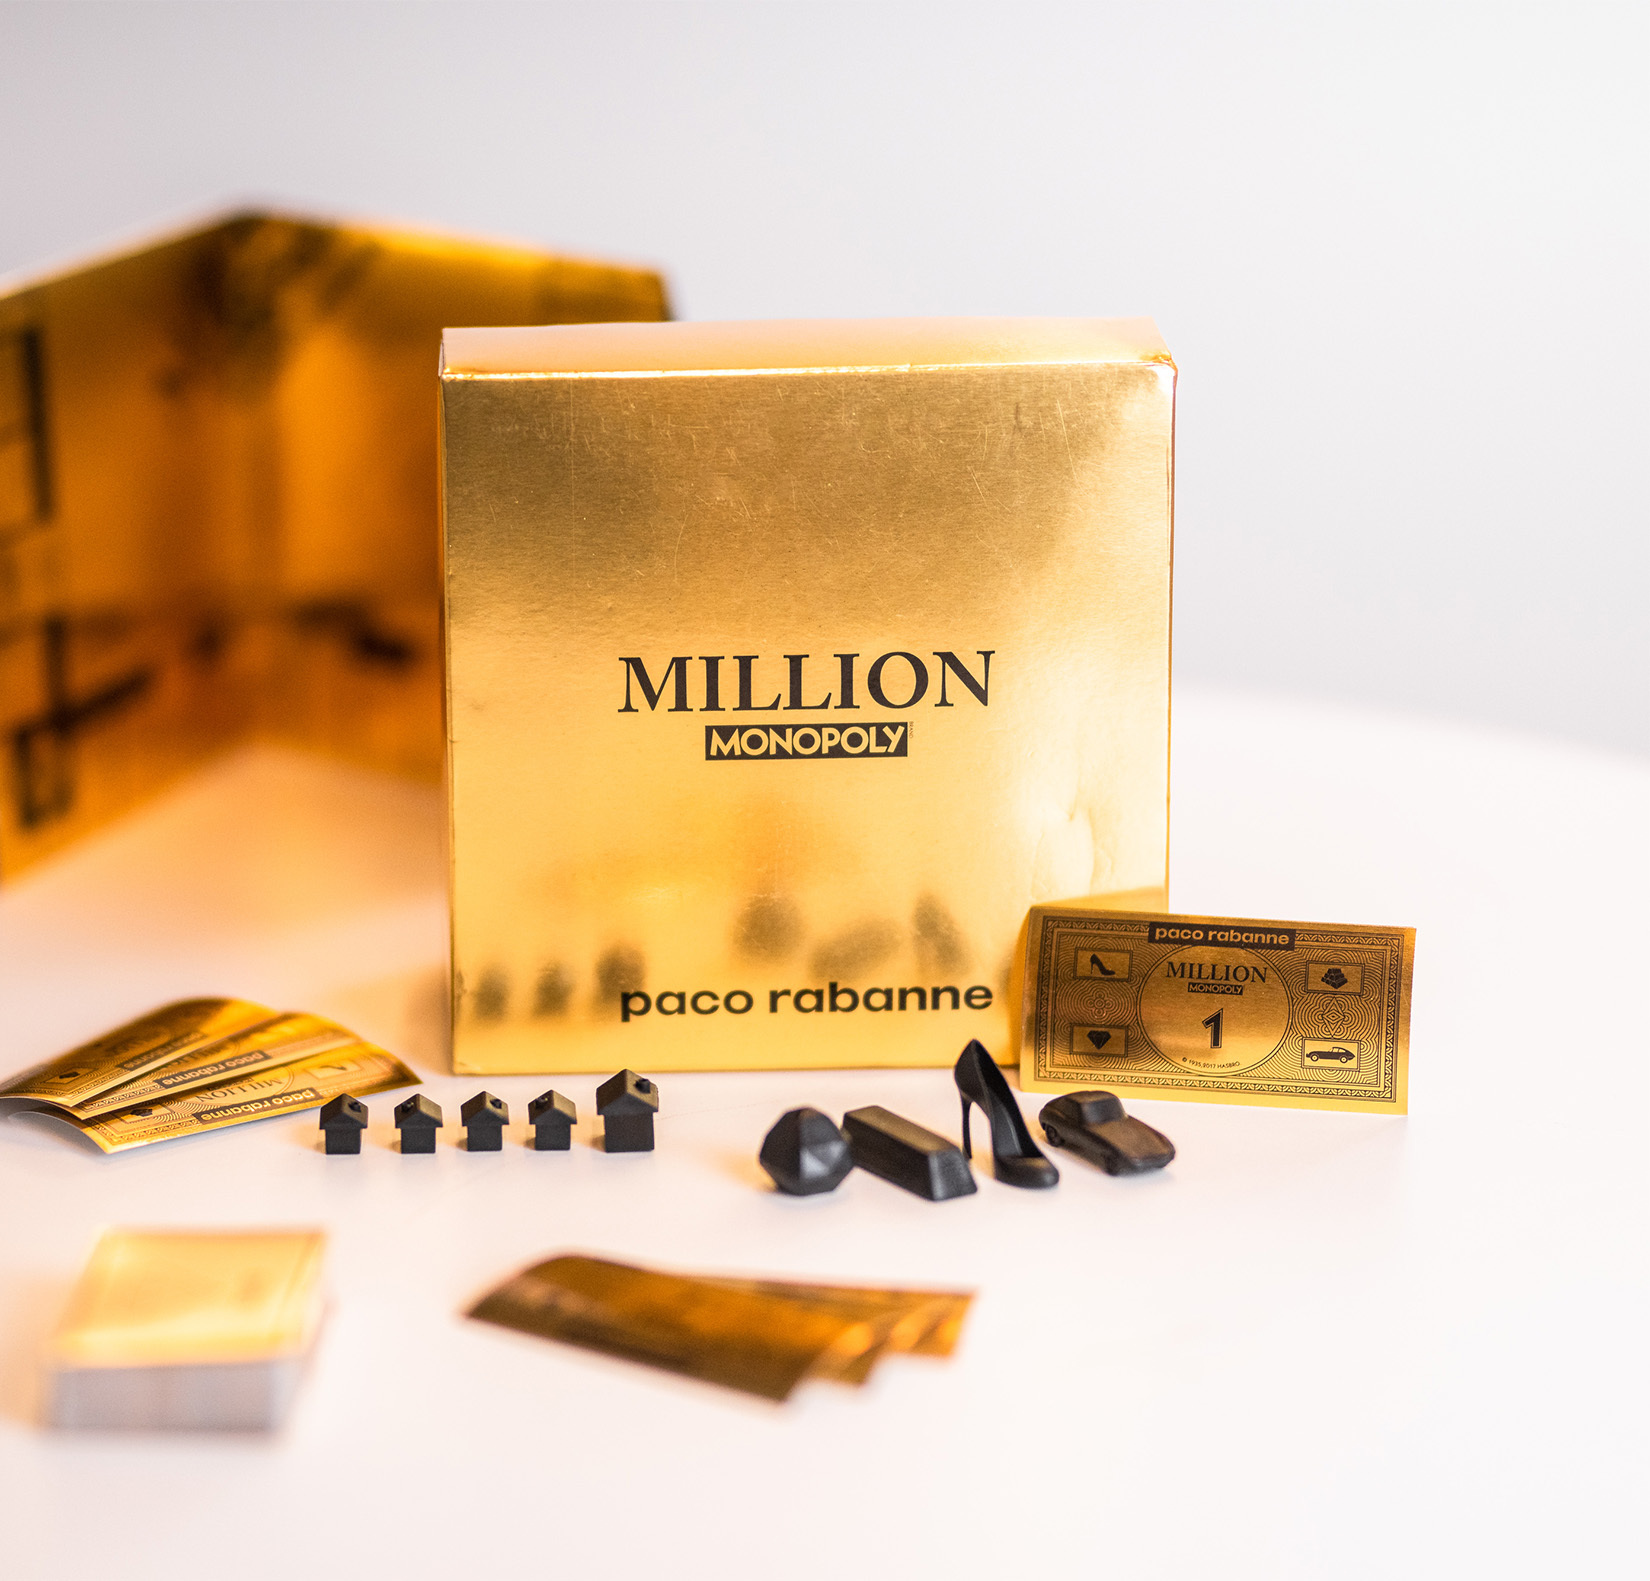 Million Monopoly game created for Paco rabanne